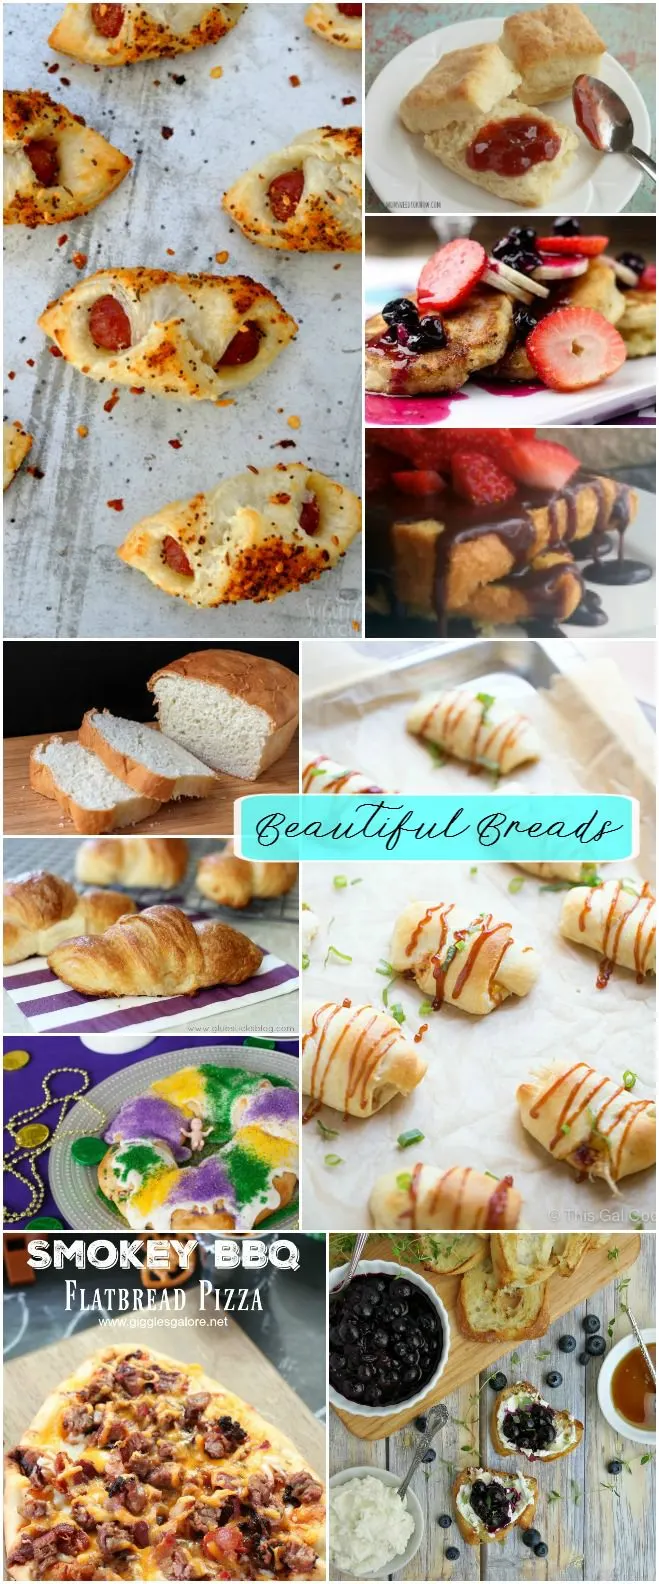 You'll fall in love with carbs again with this Beautiful Bread Recipe Collection! Featuring homemade bread, homemade biscuits, and Pigs in a Blanket! YUM! It's a Carb feast!